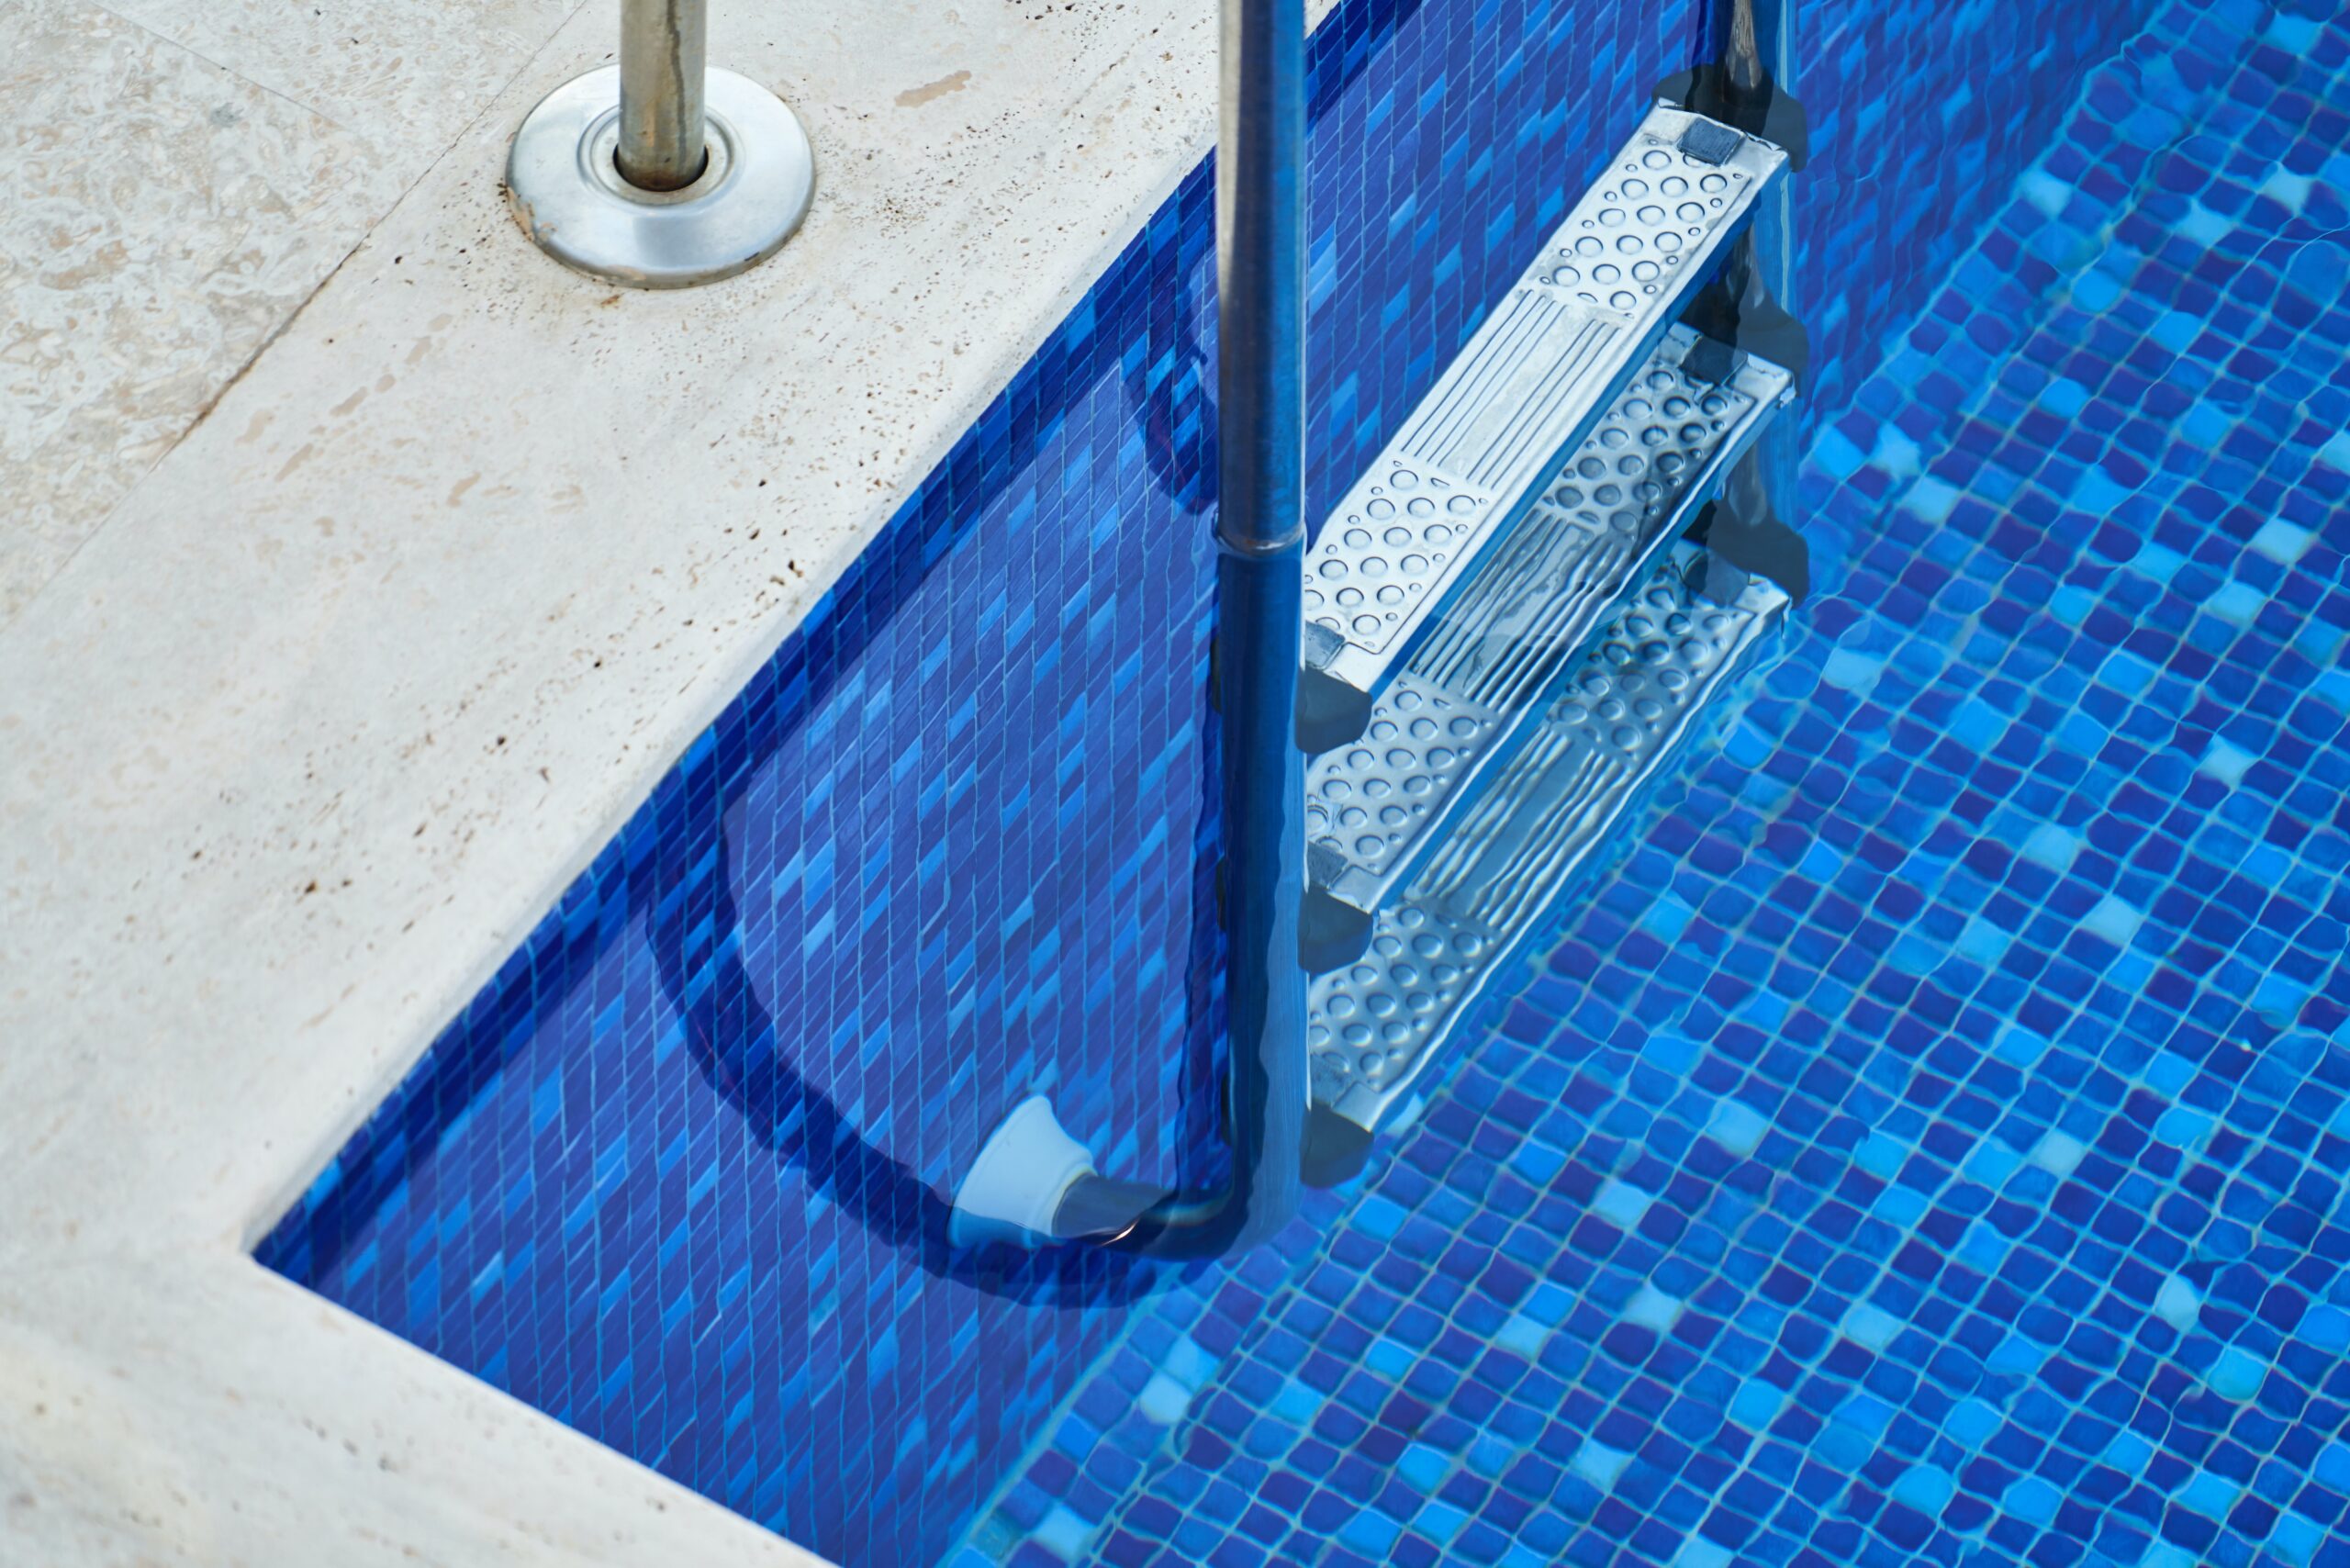 Swimming Pool Cost In Canada, How Much Does It Cost To Tile A Swimming Pool